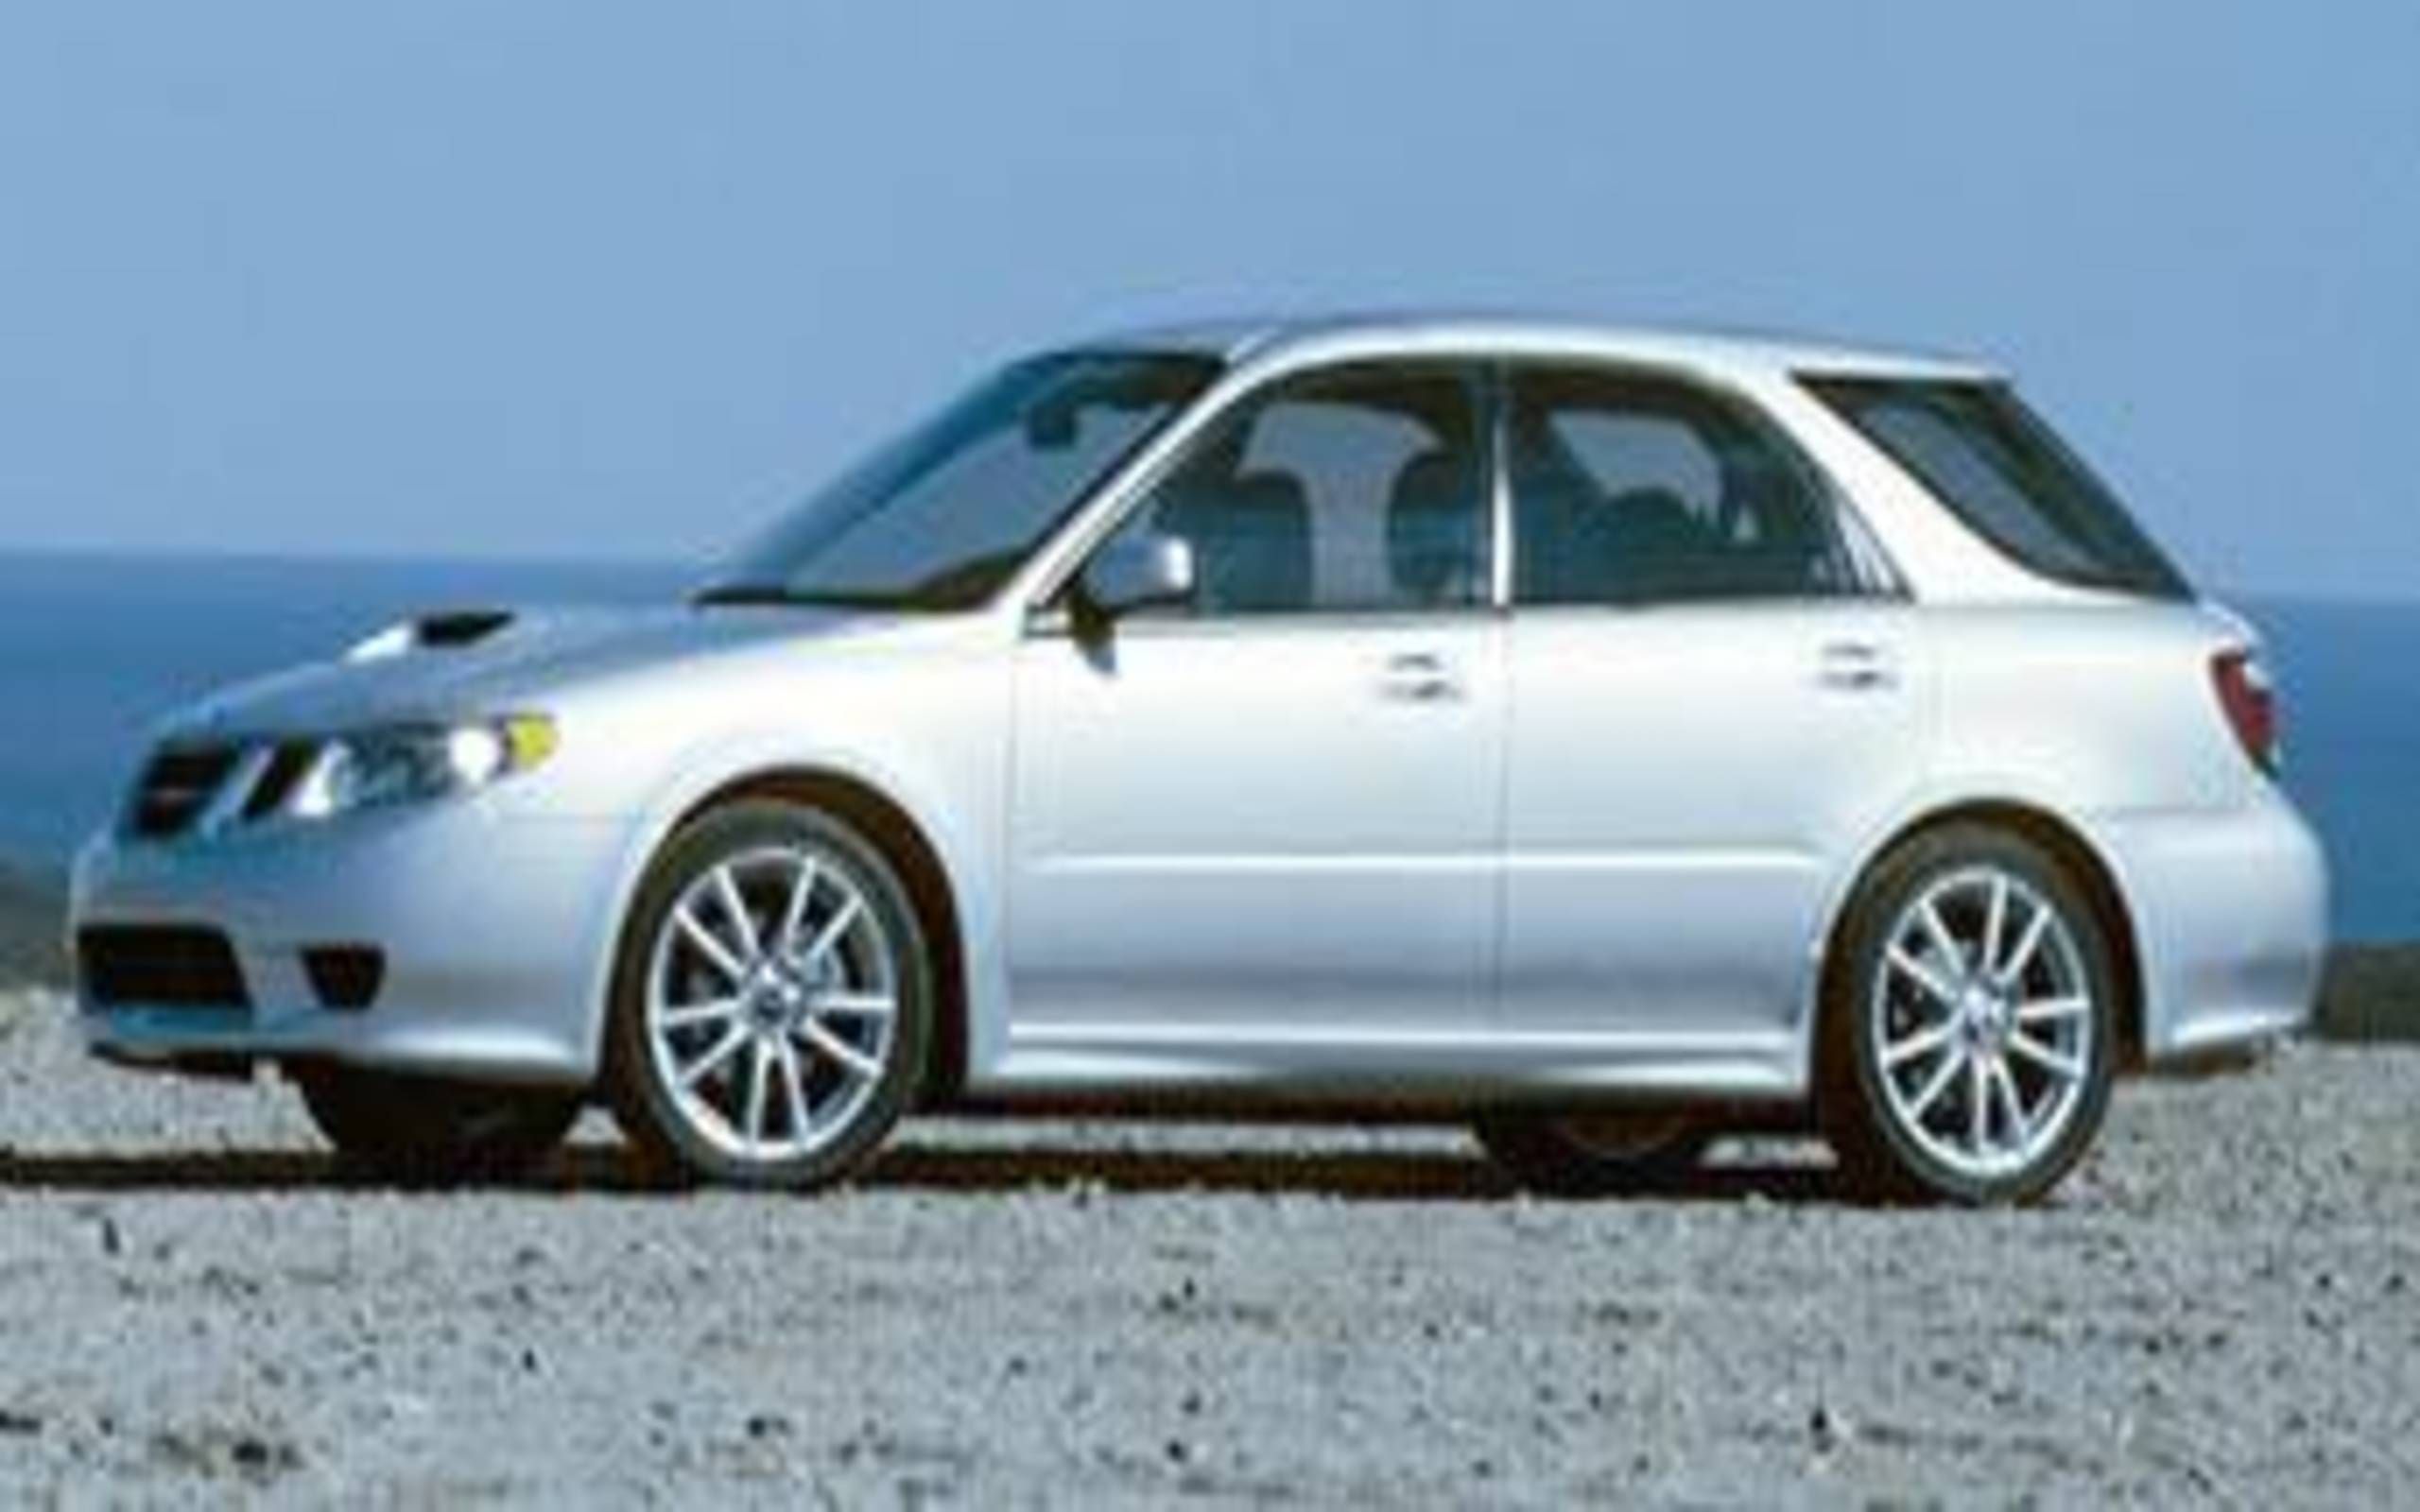 2005 Saab 9-2X Aero: All in the Family: The Saab 9-2X gets help from a  long-distance cousin